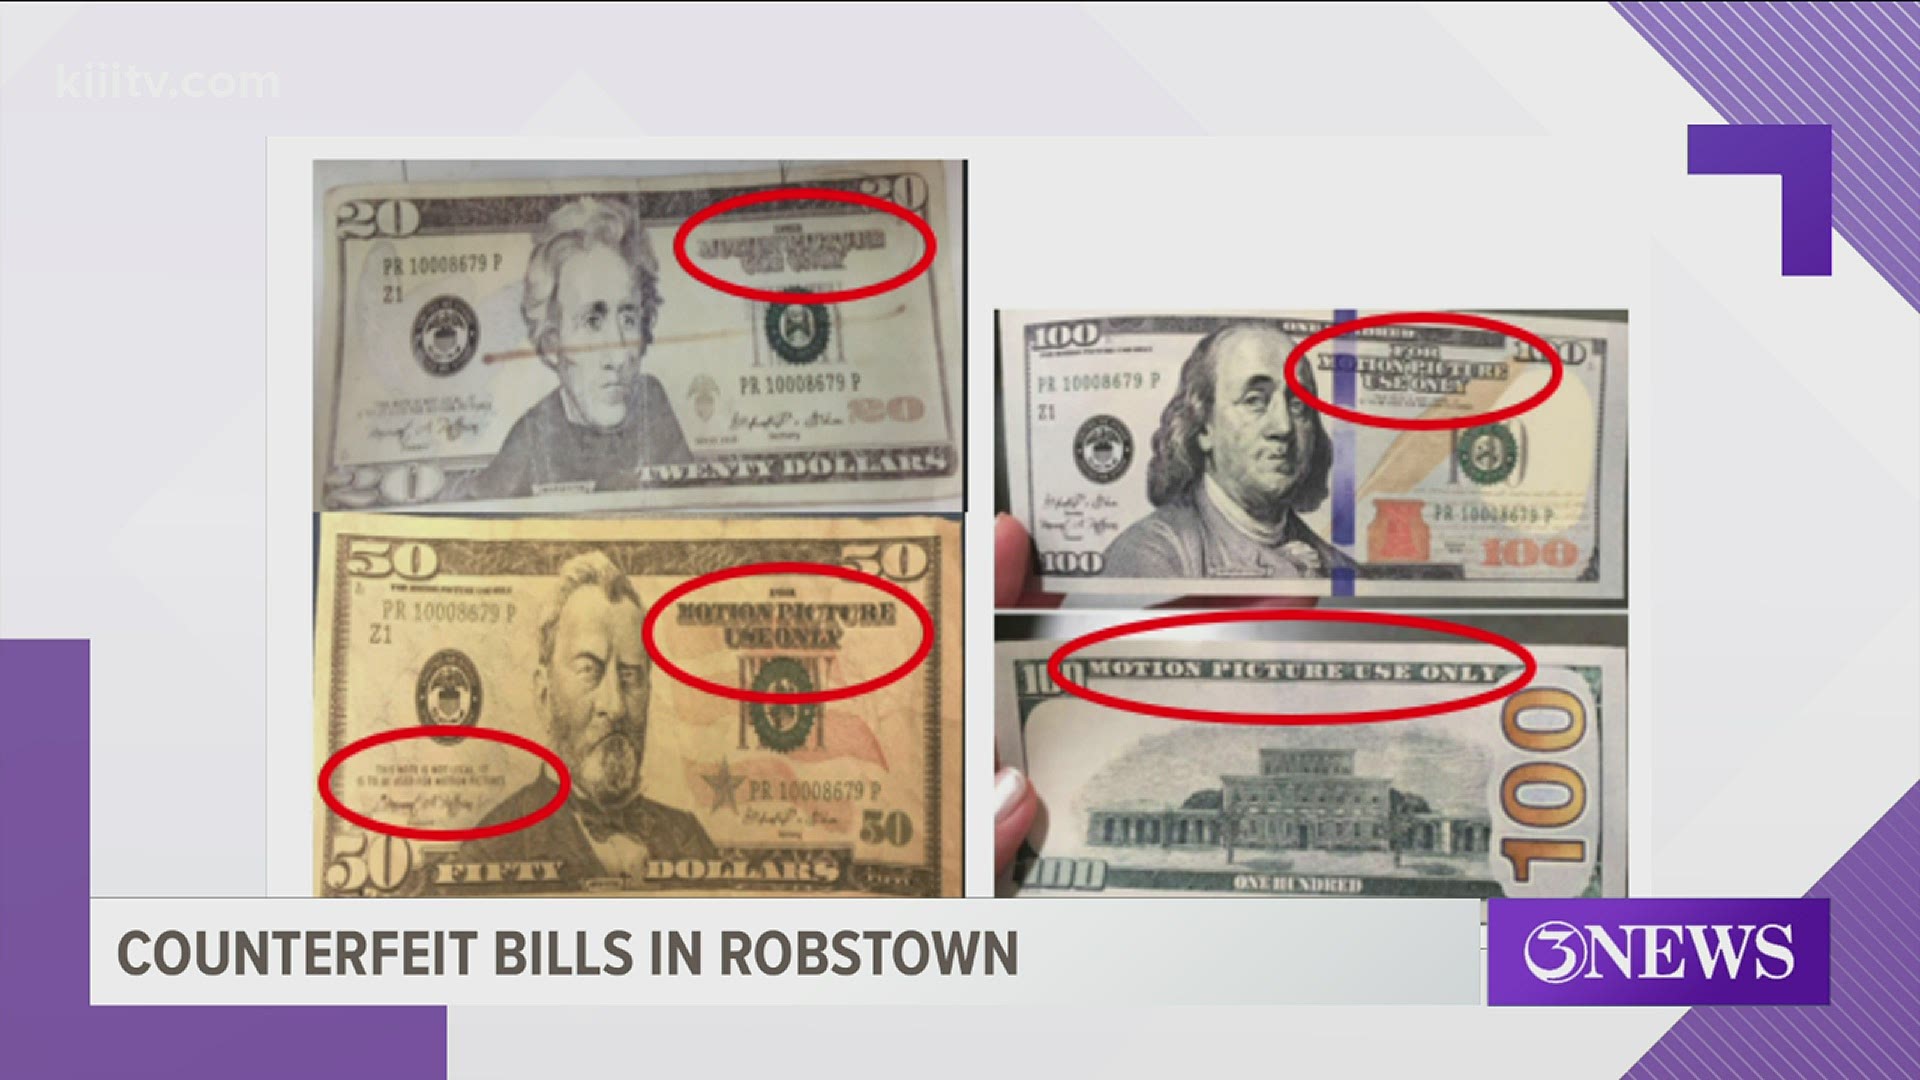 If caught using counterfeit bills, the suspect could face counts of Forgery, which is a Felony in Texas.